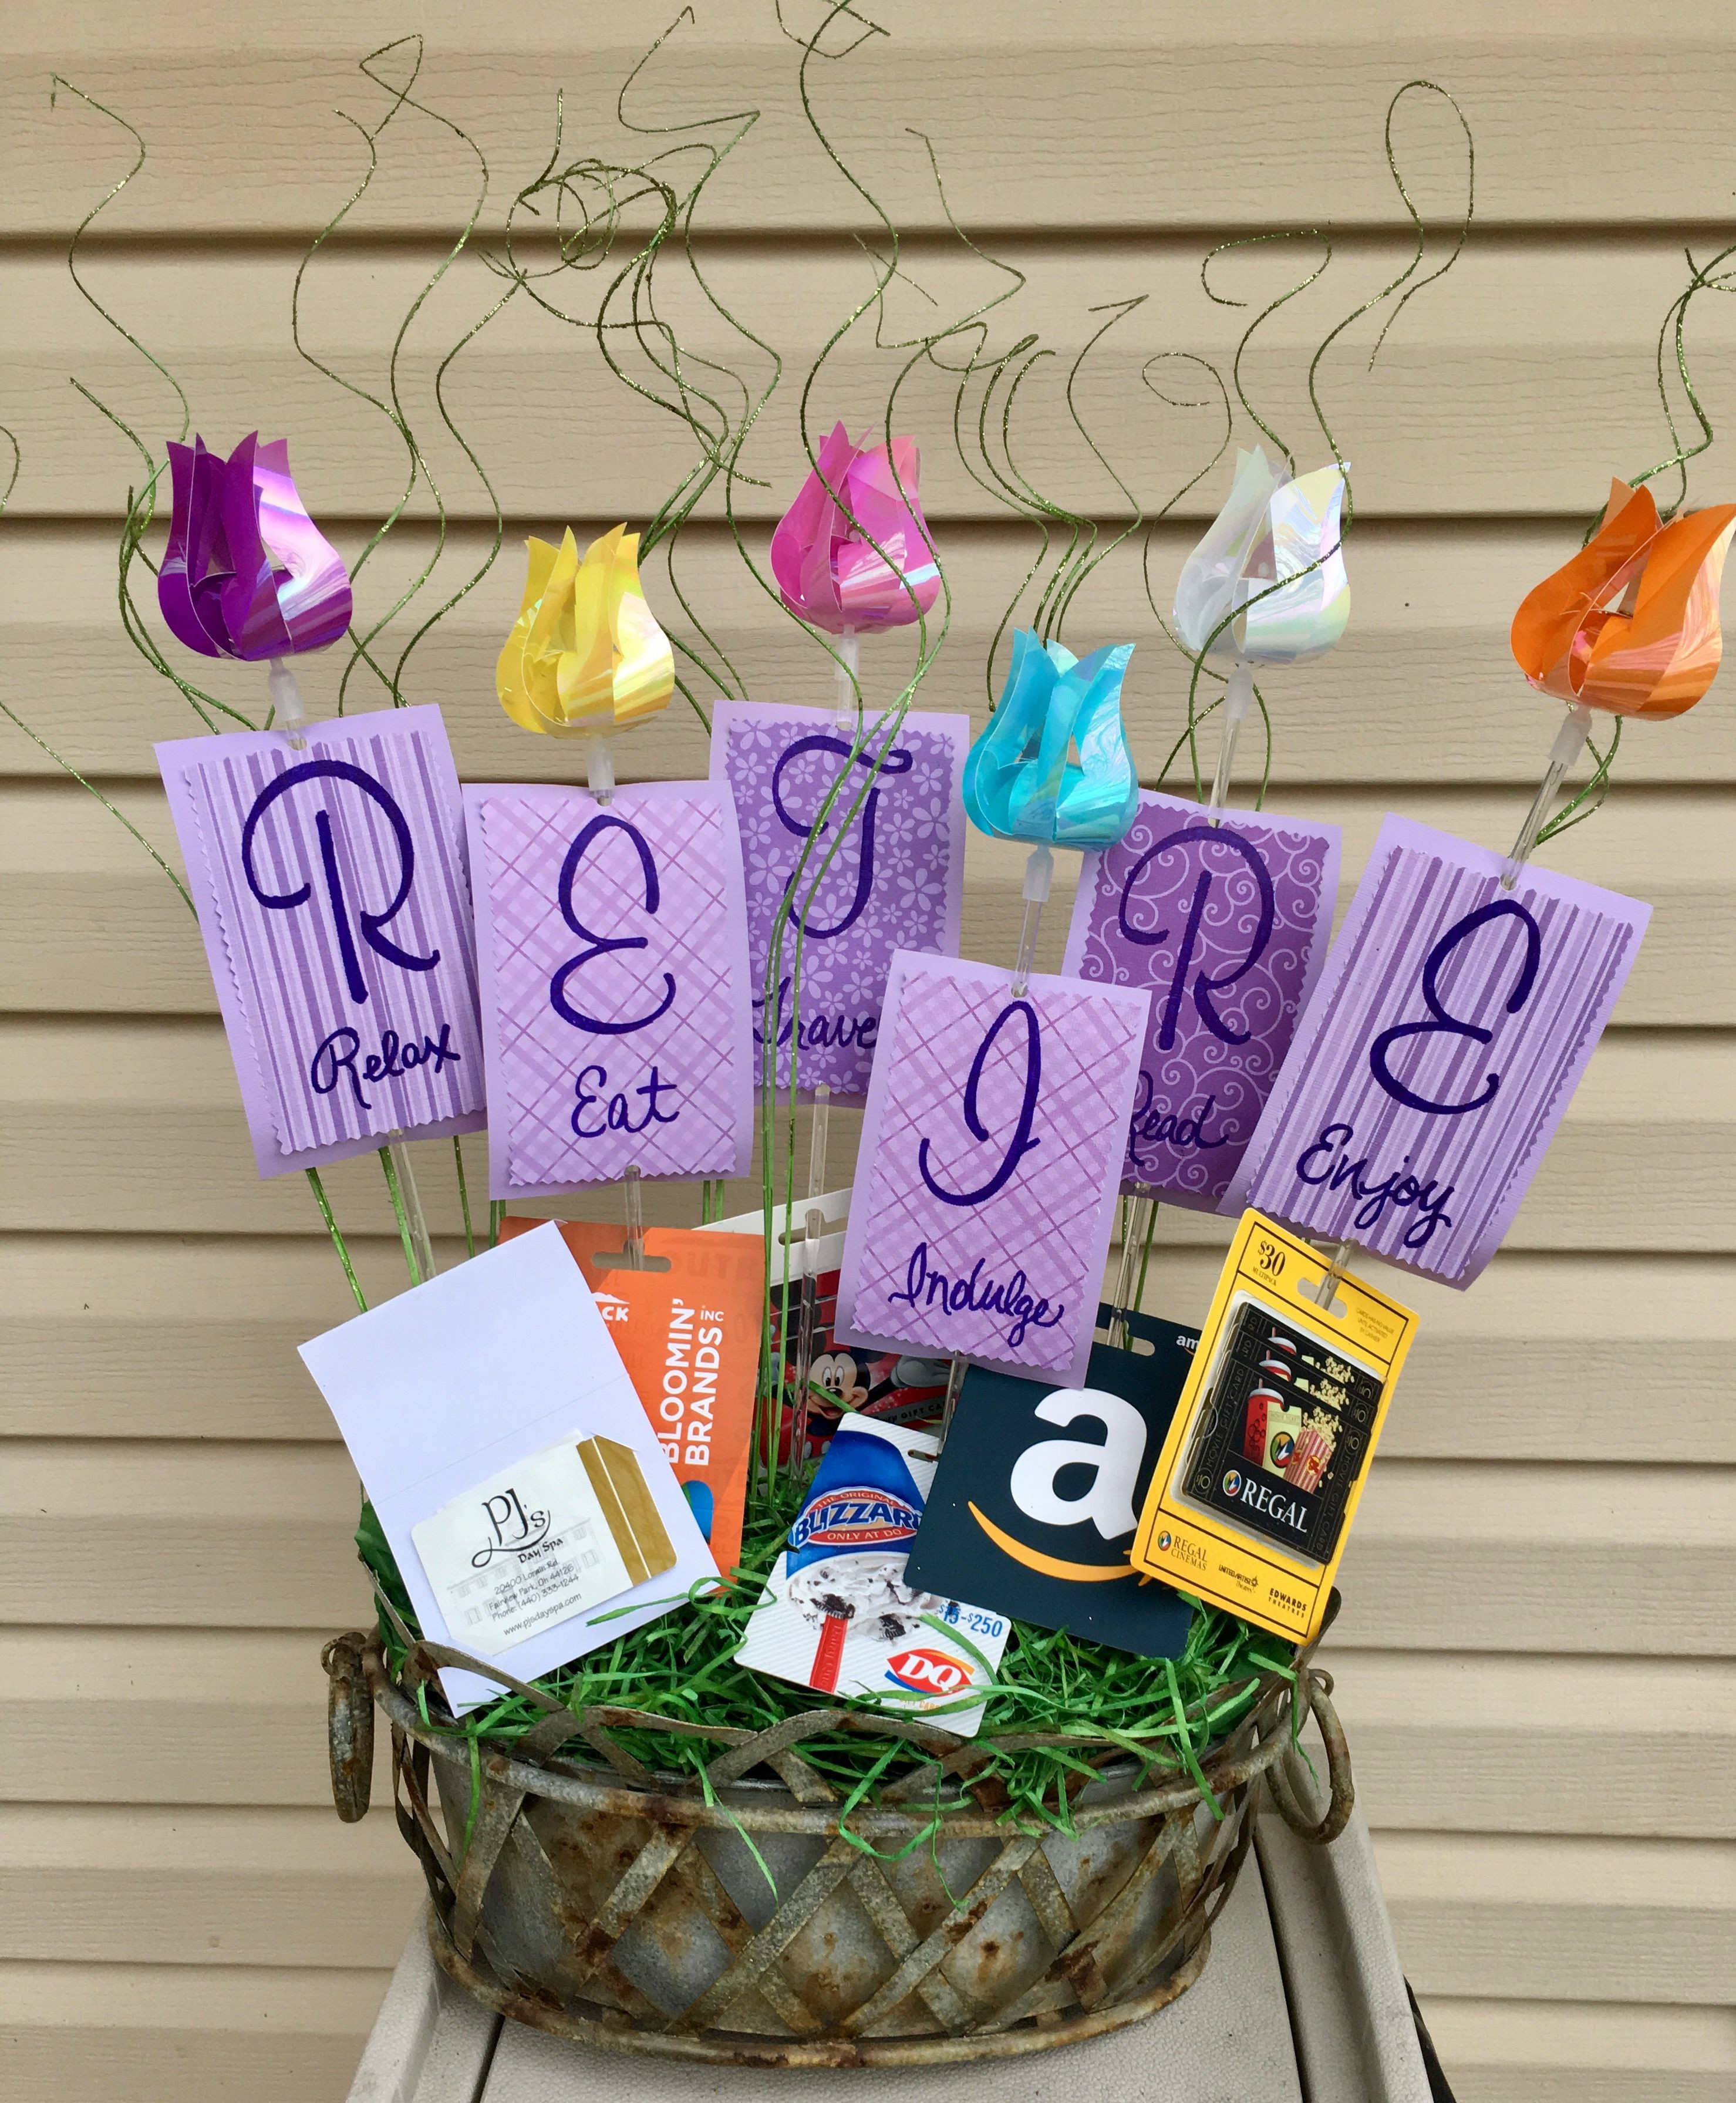 Best ideas about Retirement Gift Ideas
. Save or Pin Retirement t basket with t cards Relax Eat Travel Now.